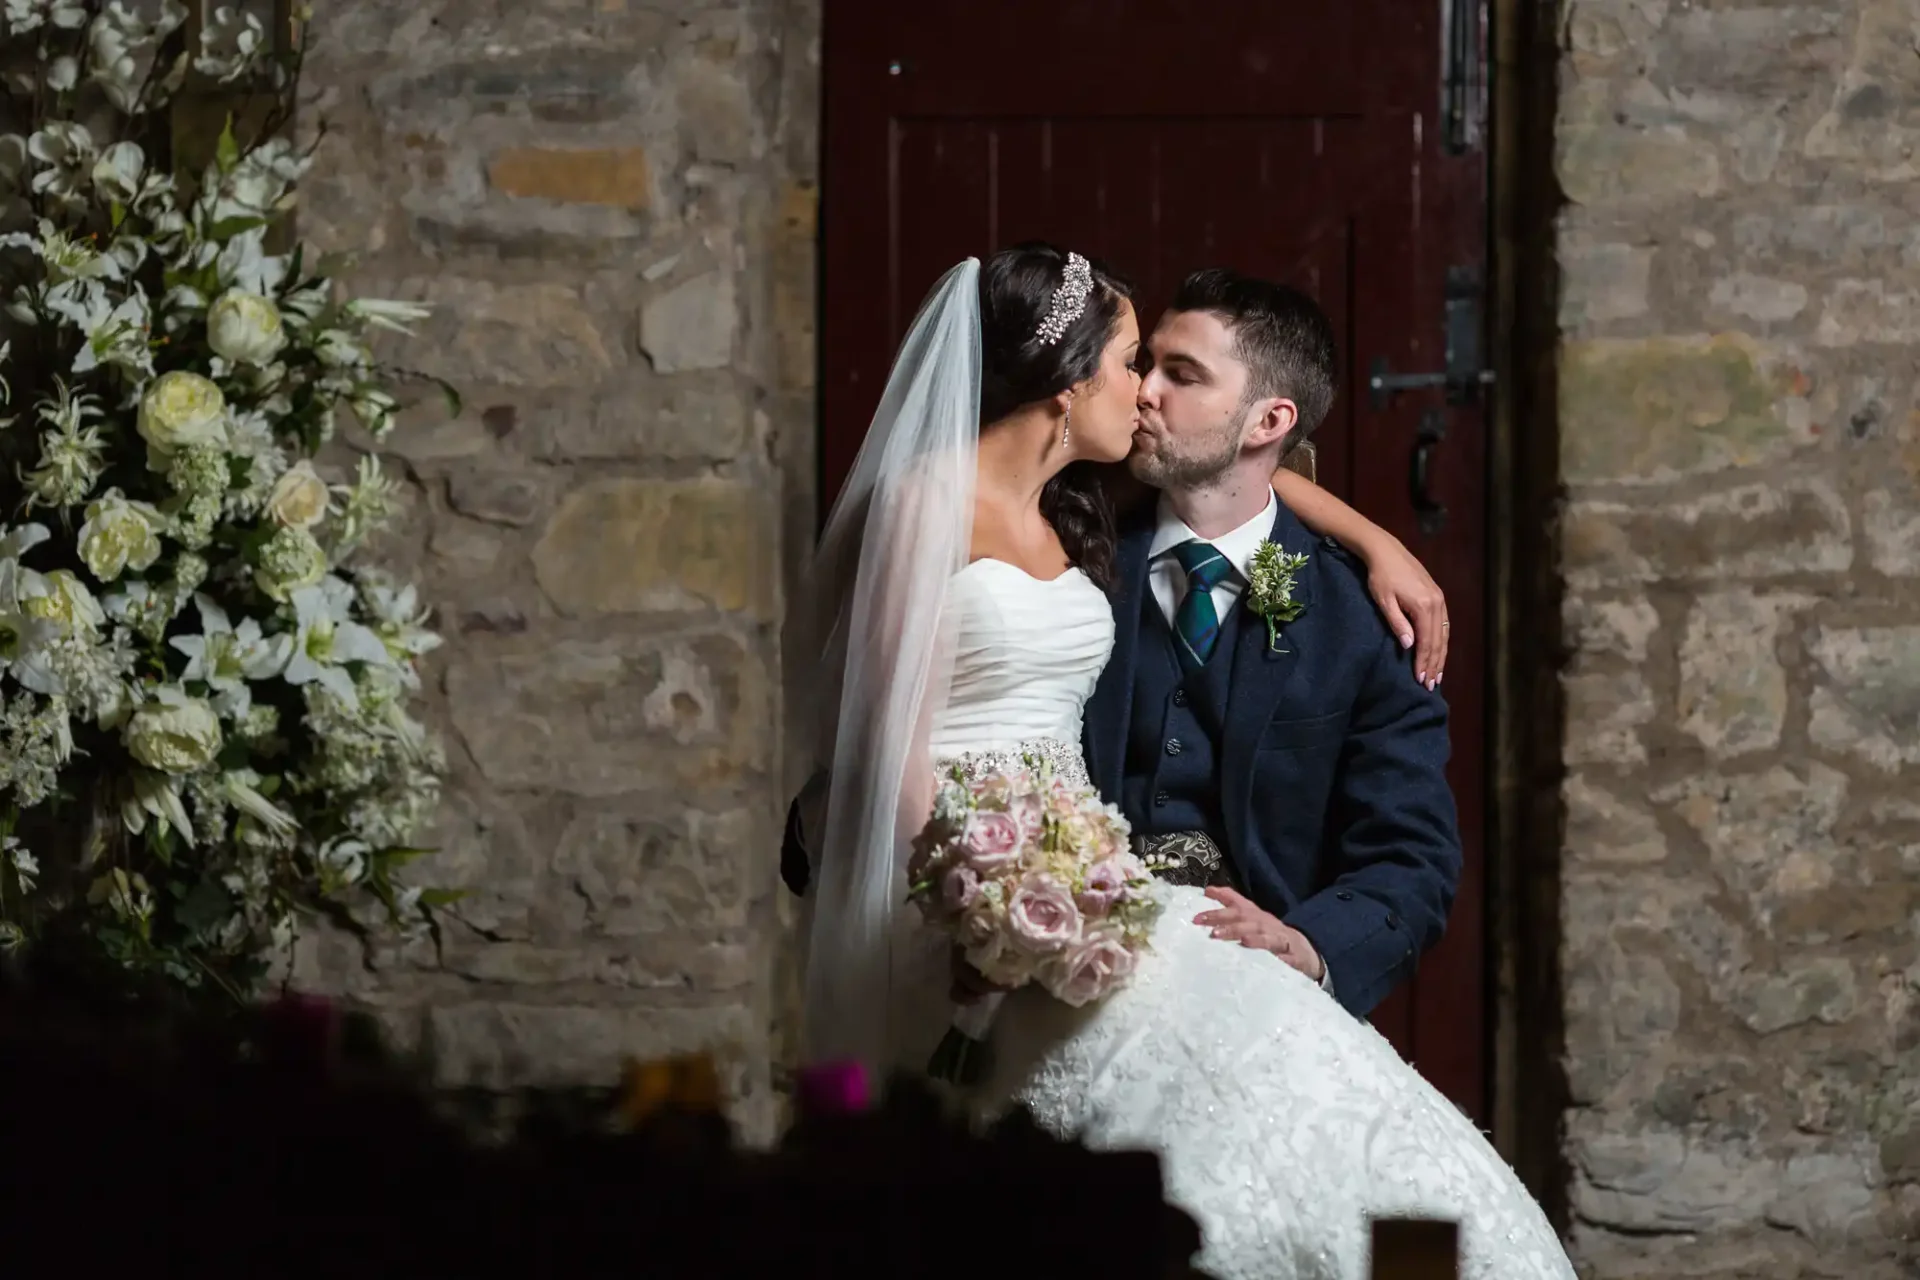 A bride and groom kiss outside a stone building, with the bride holding a bouquet of pink and white flowers.